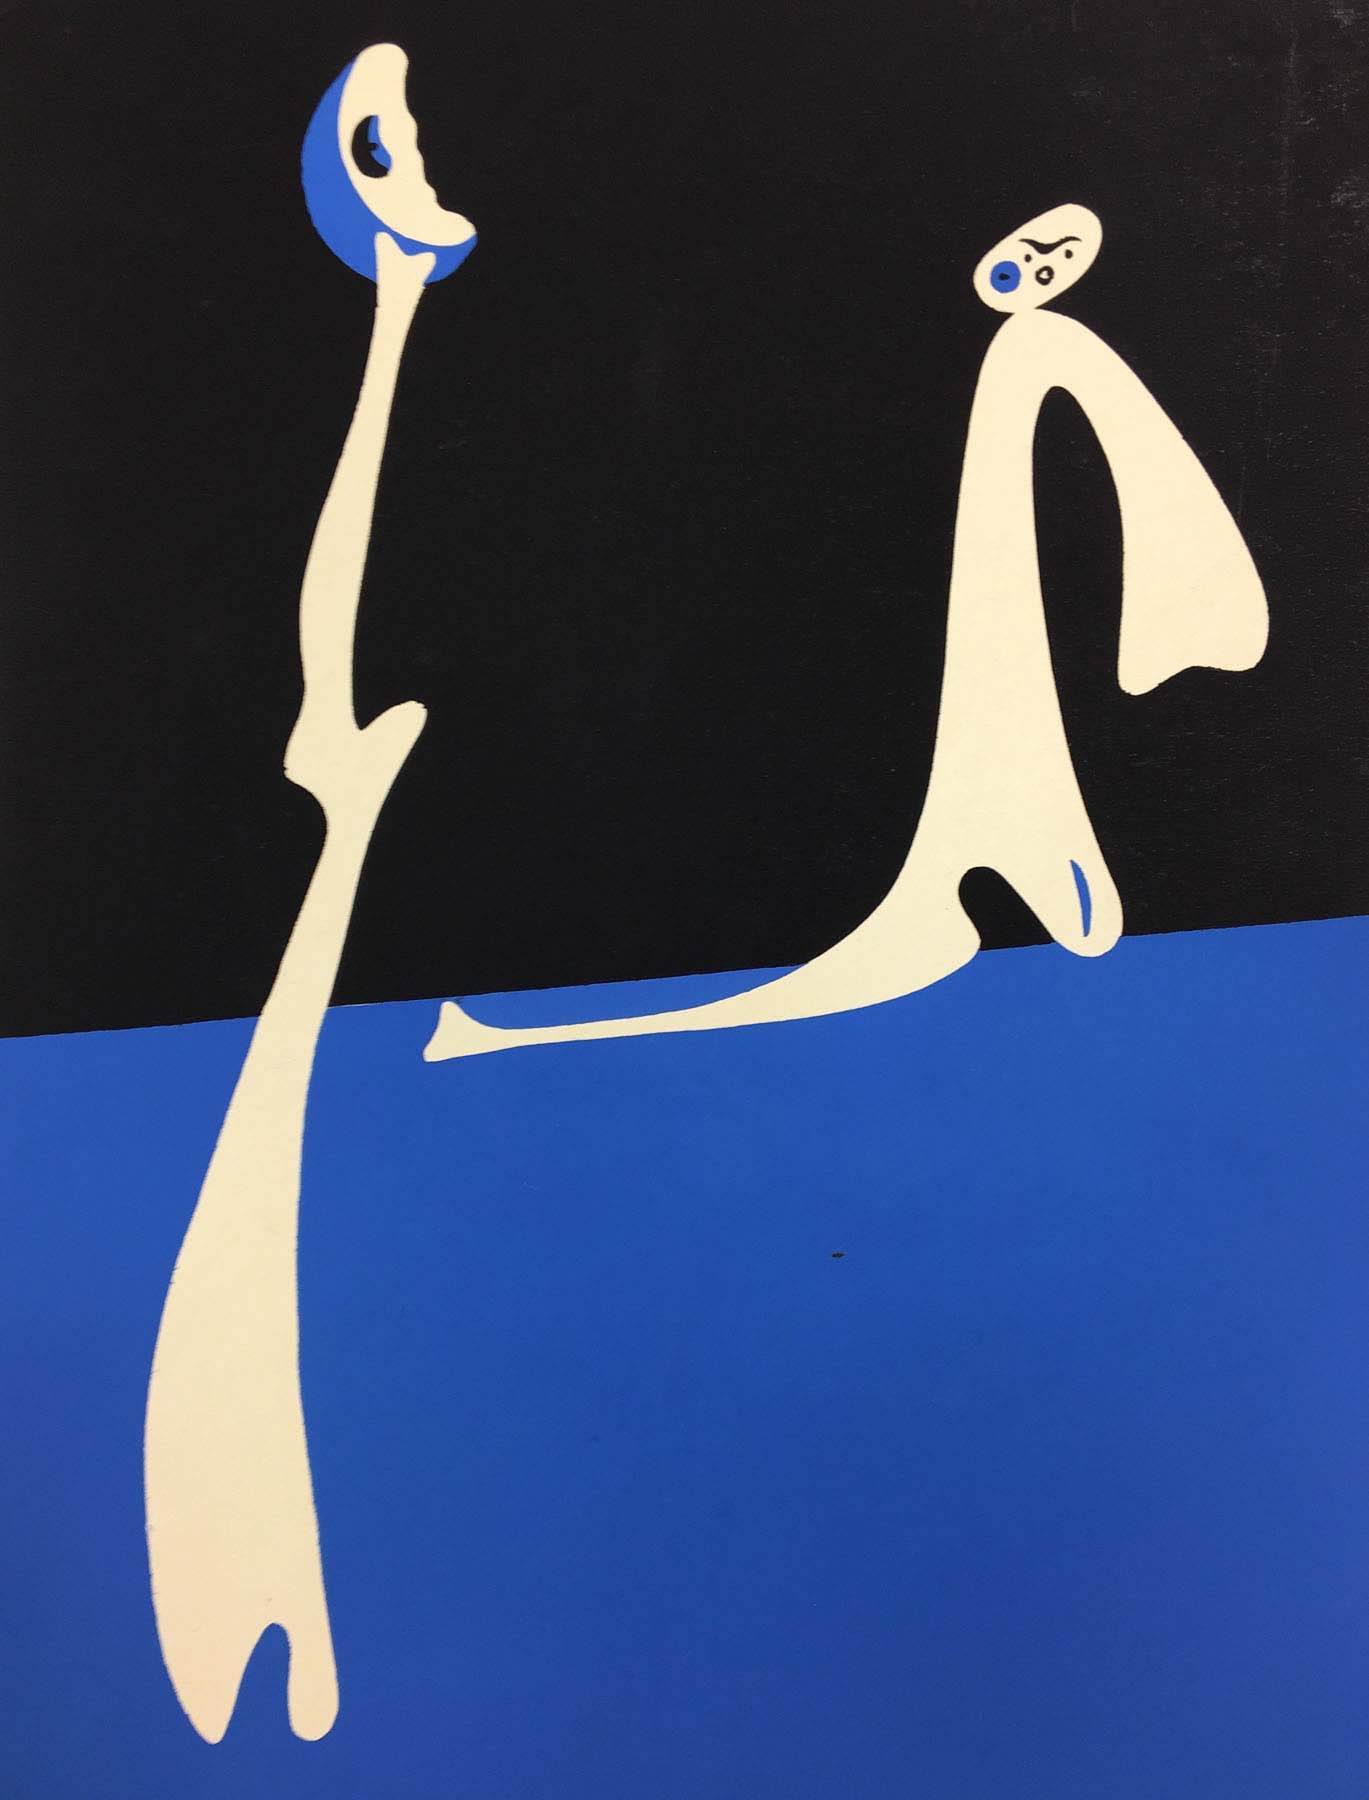 A prodominently blue, black, and white painting of two abstract, human-like figures in a portrait orientation.